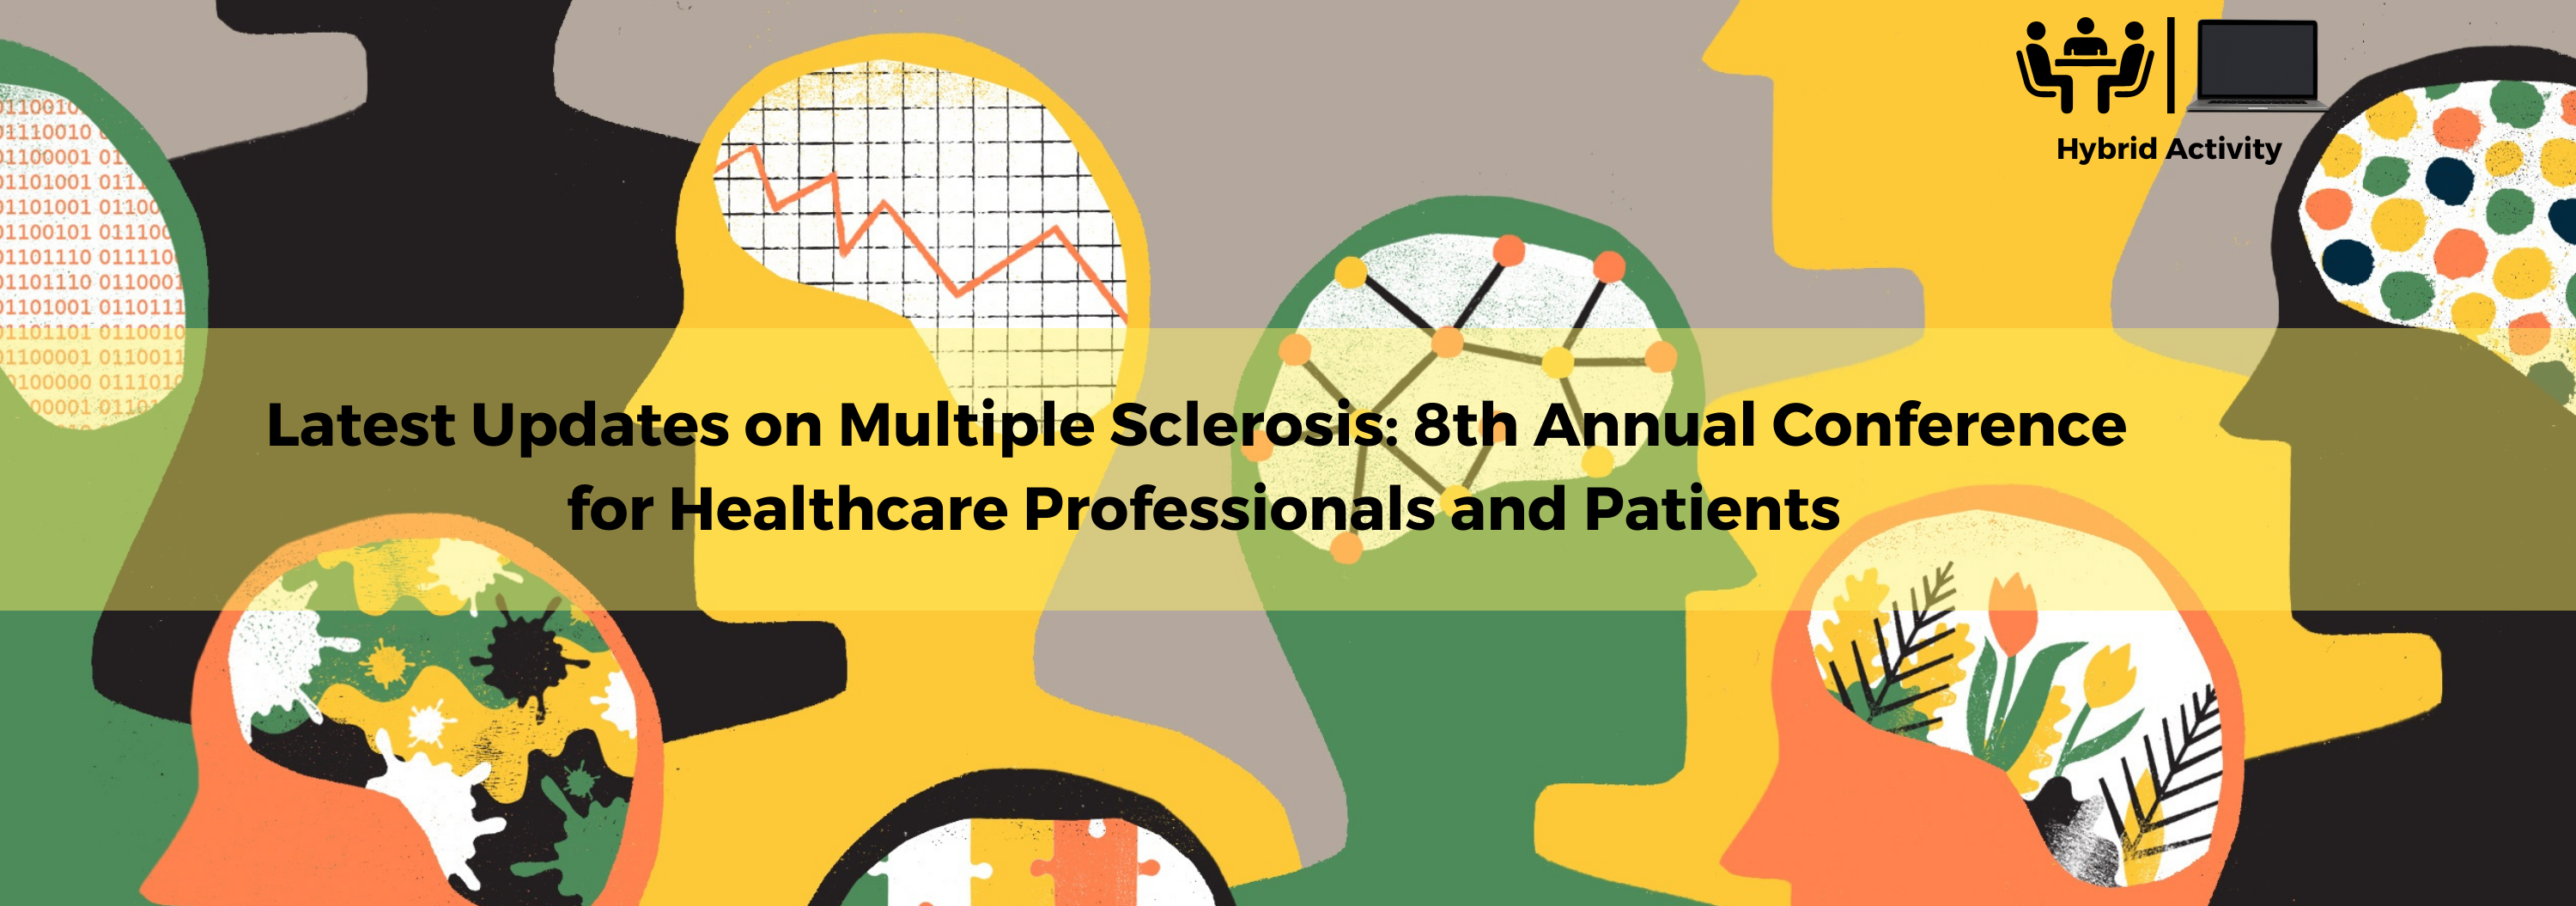 Latest Updates on Multiple Sclerosis: 8th Annual Conference for Healthcare Professionals and Patients Banner